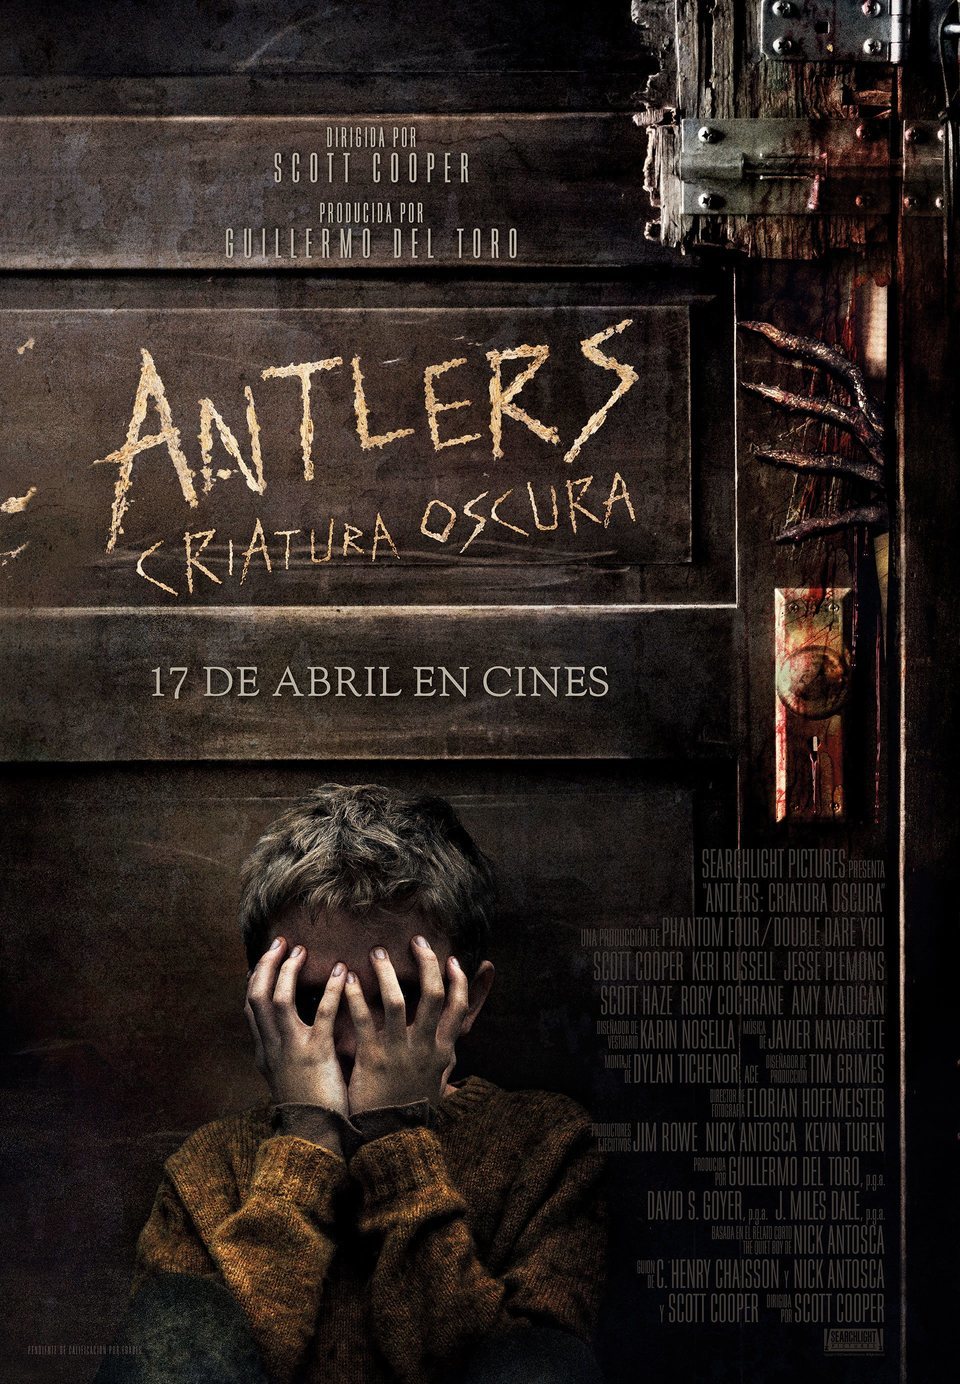 Poster of Antlers - 'Antlers: Criatura oscura' Póster España